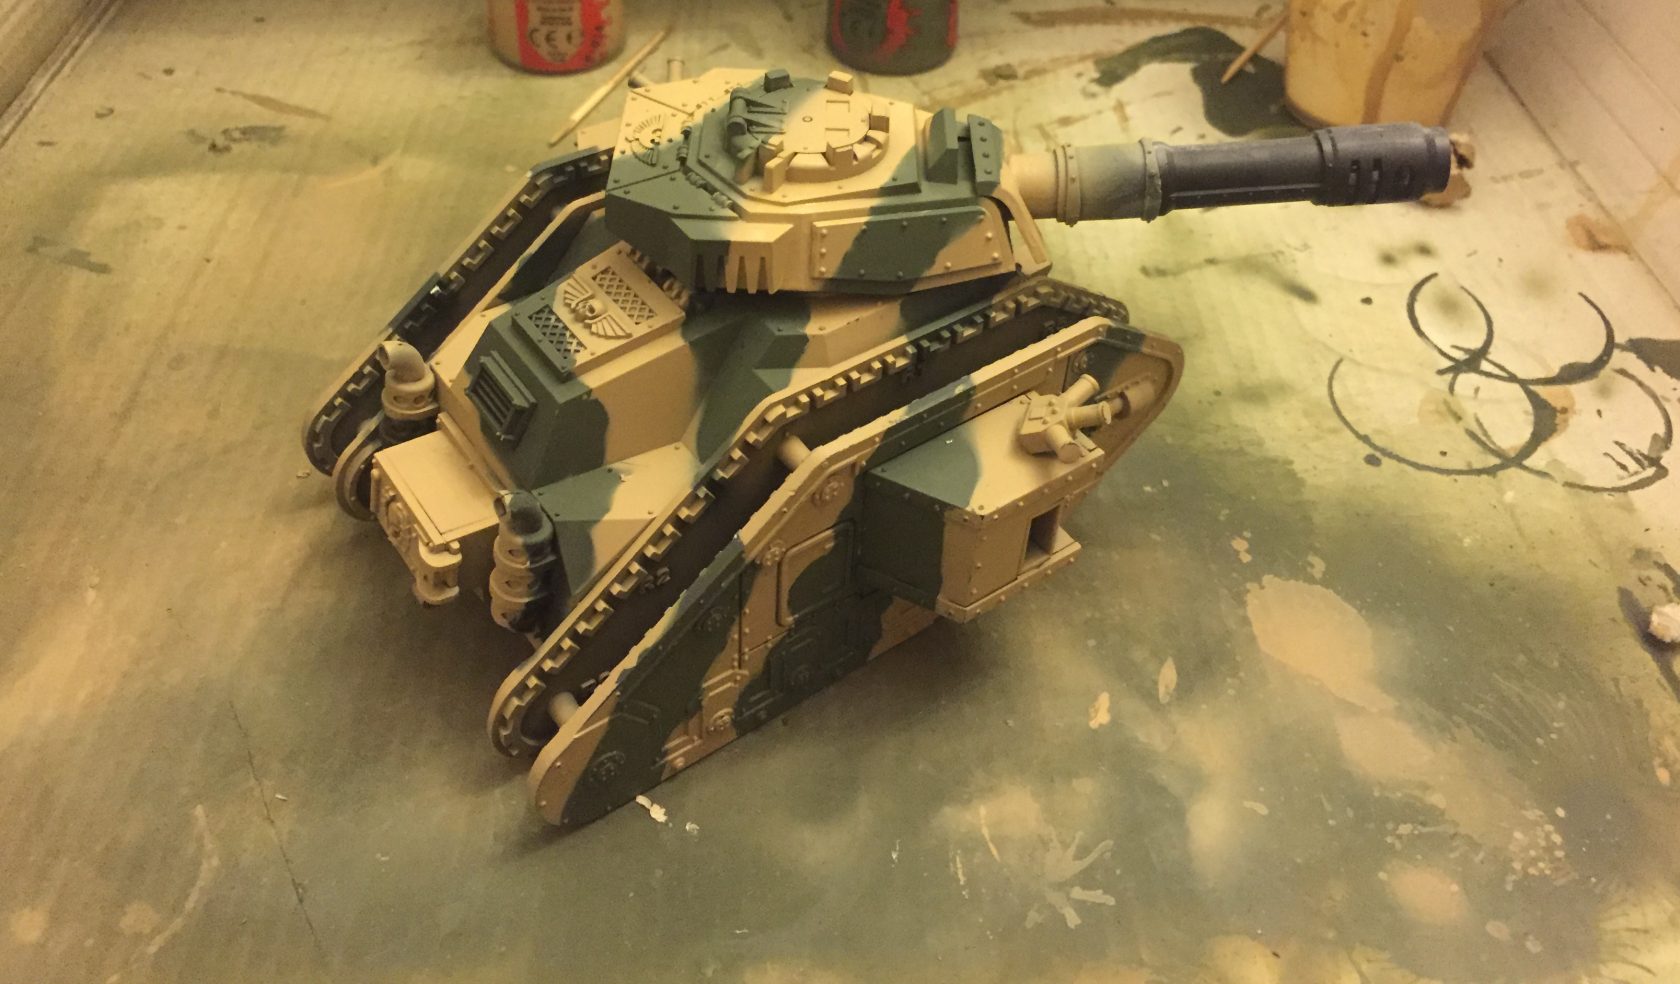 Airbrush Session for Cadian Camo - Warhammer 40K Blog